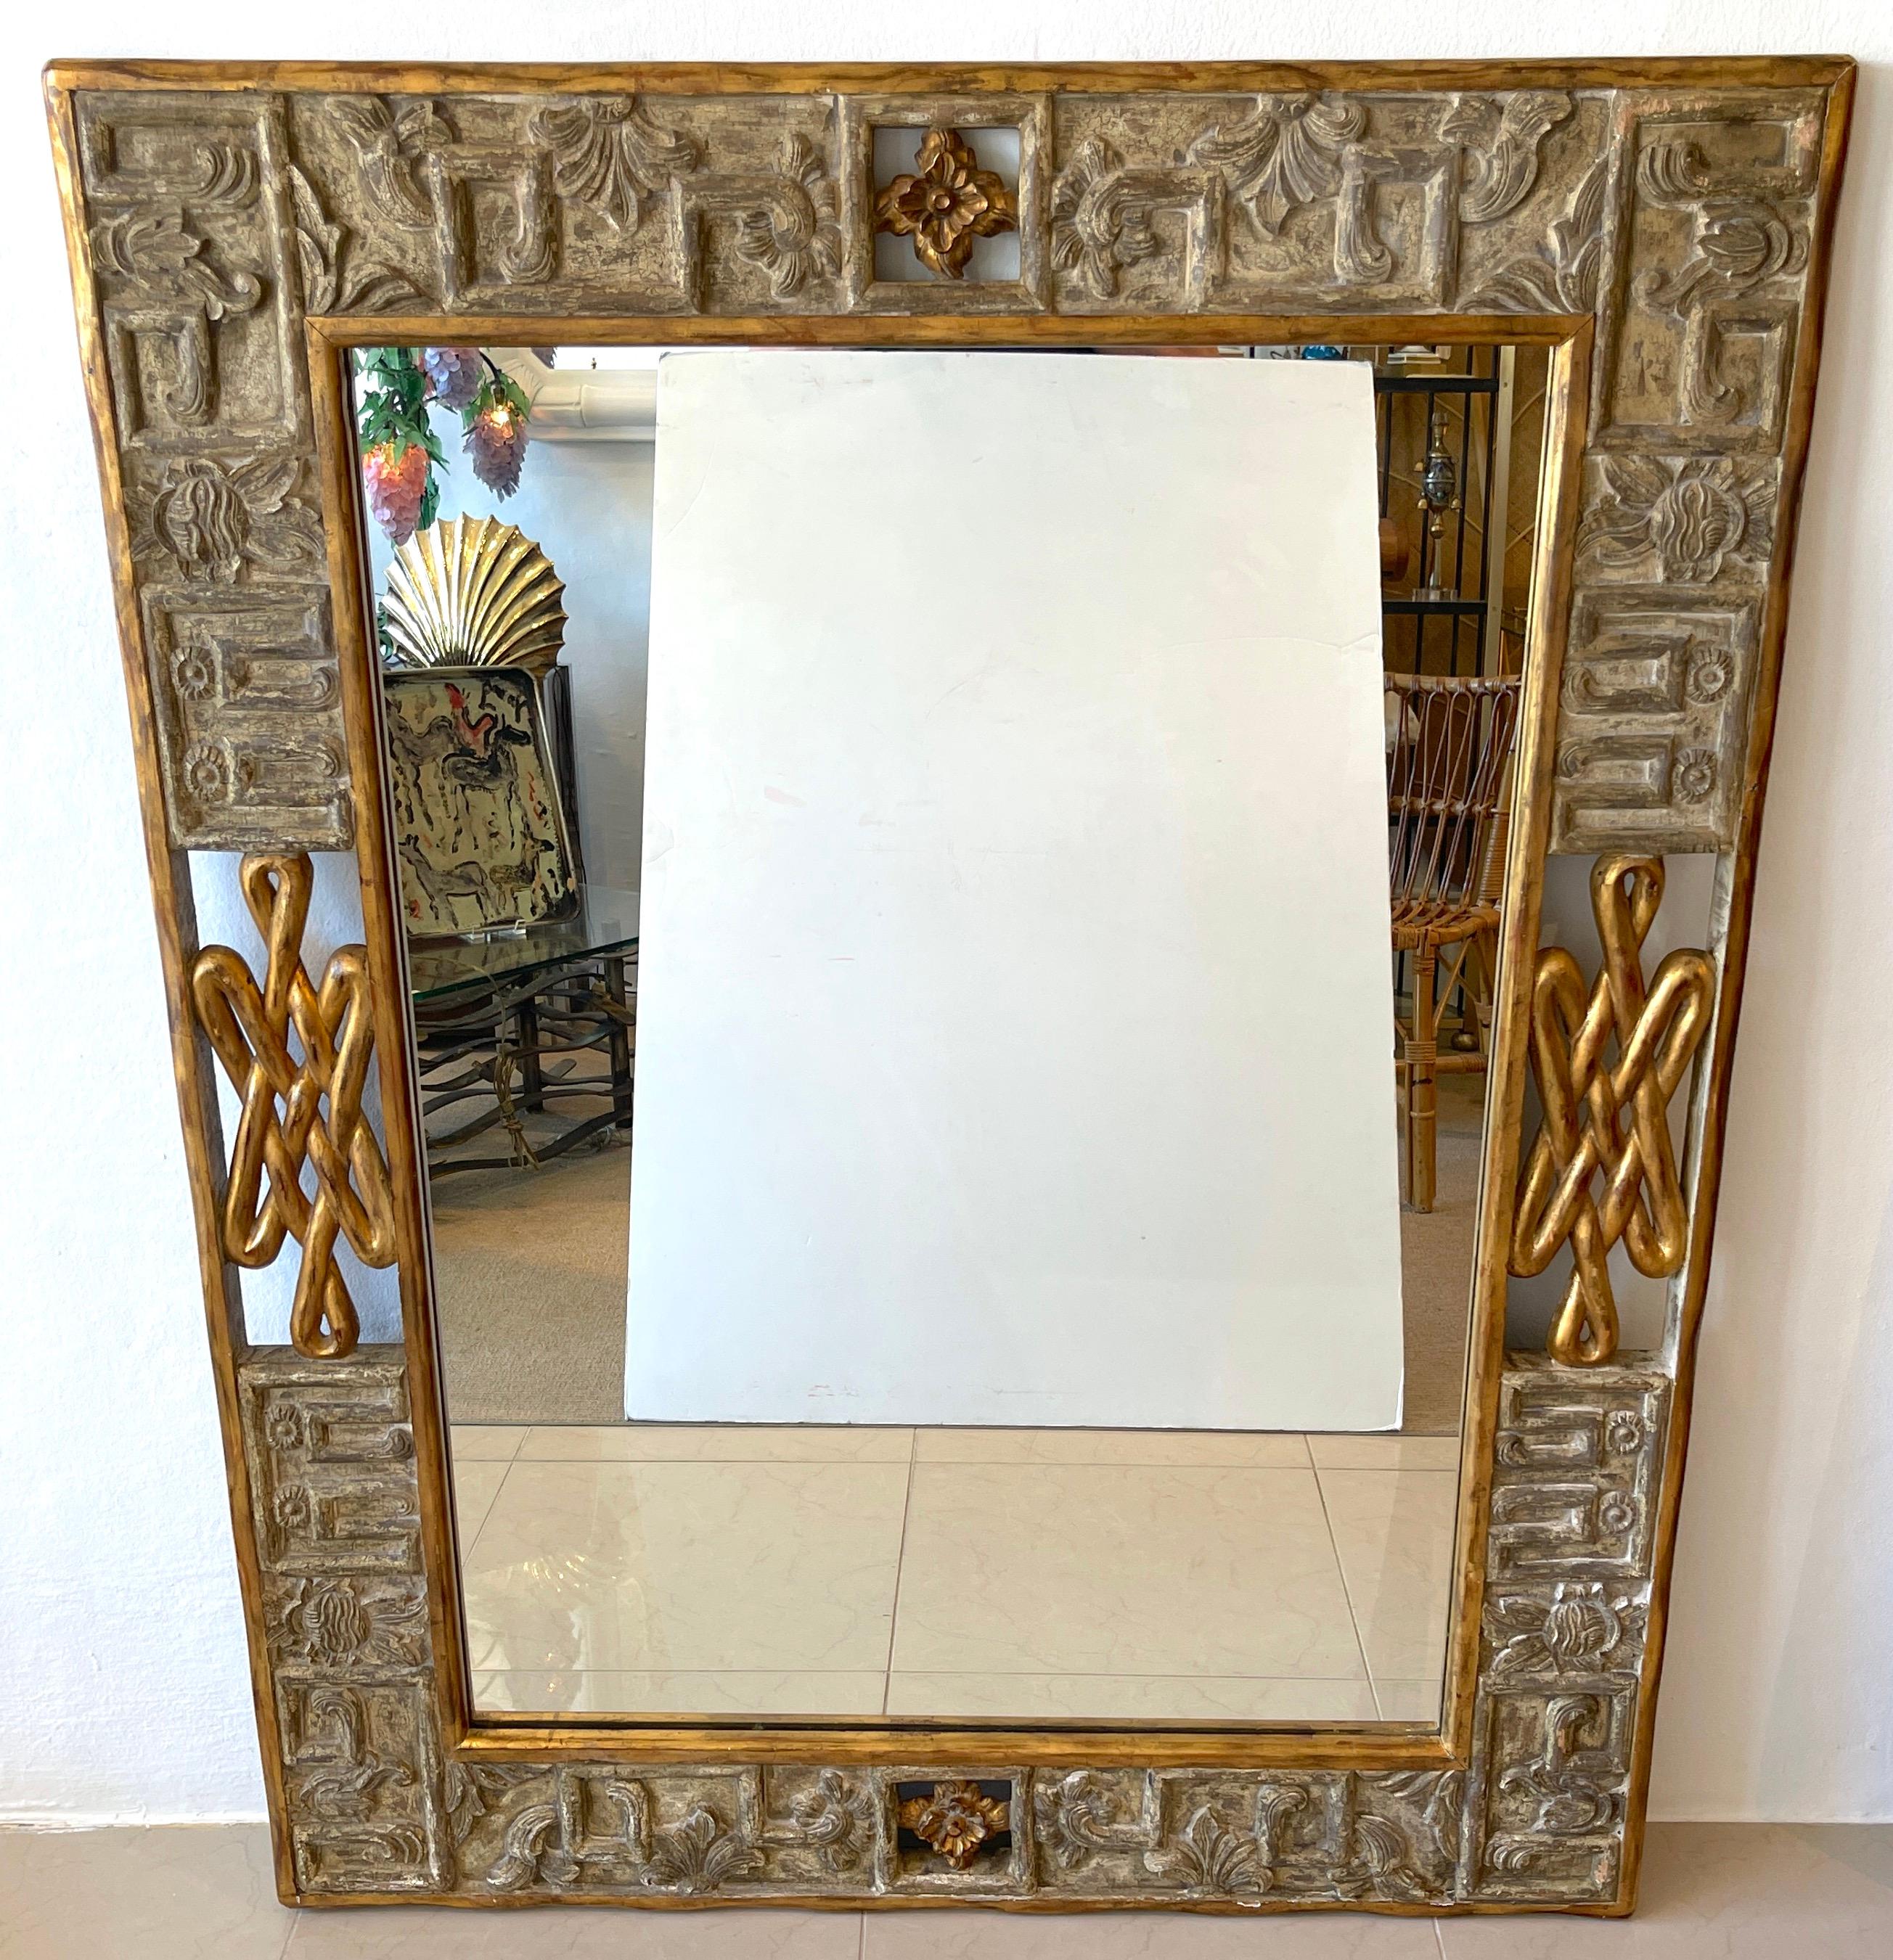 French Modern Carved Gilt & Silver Wood Mirror
France, Late 20th Century 
A substantial hand carved work, the continuous surround, with pierced giltwood rosettes and elements with alternating silver-leaf relief carvings. The inset mirror measures